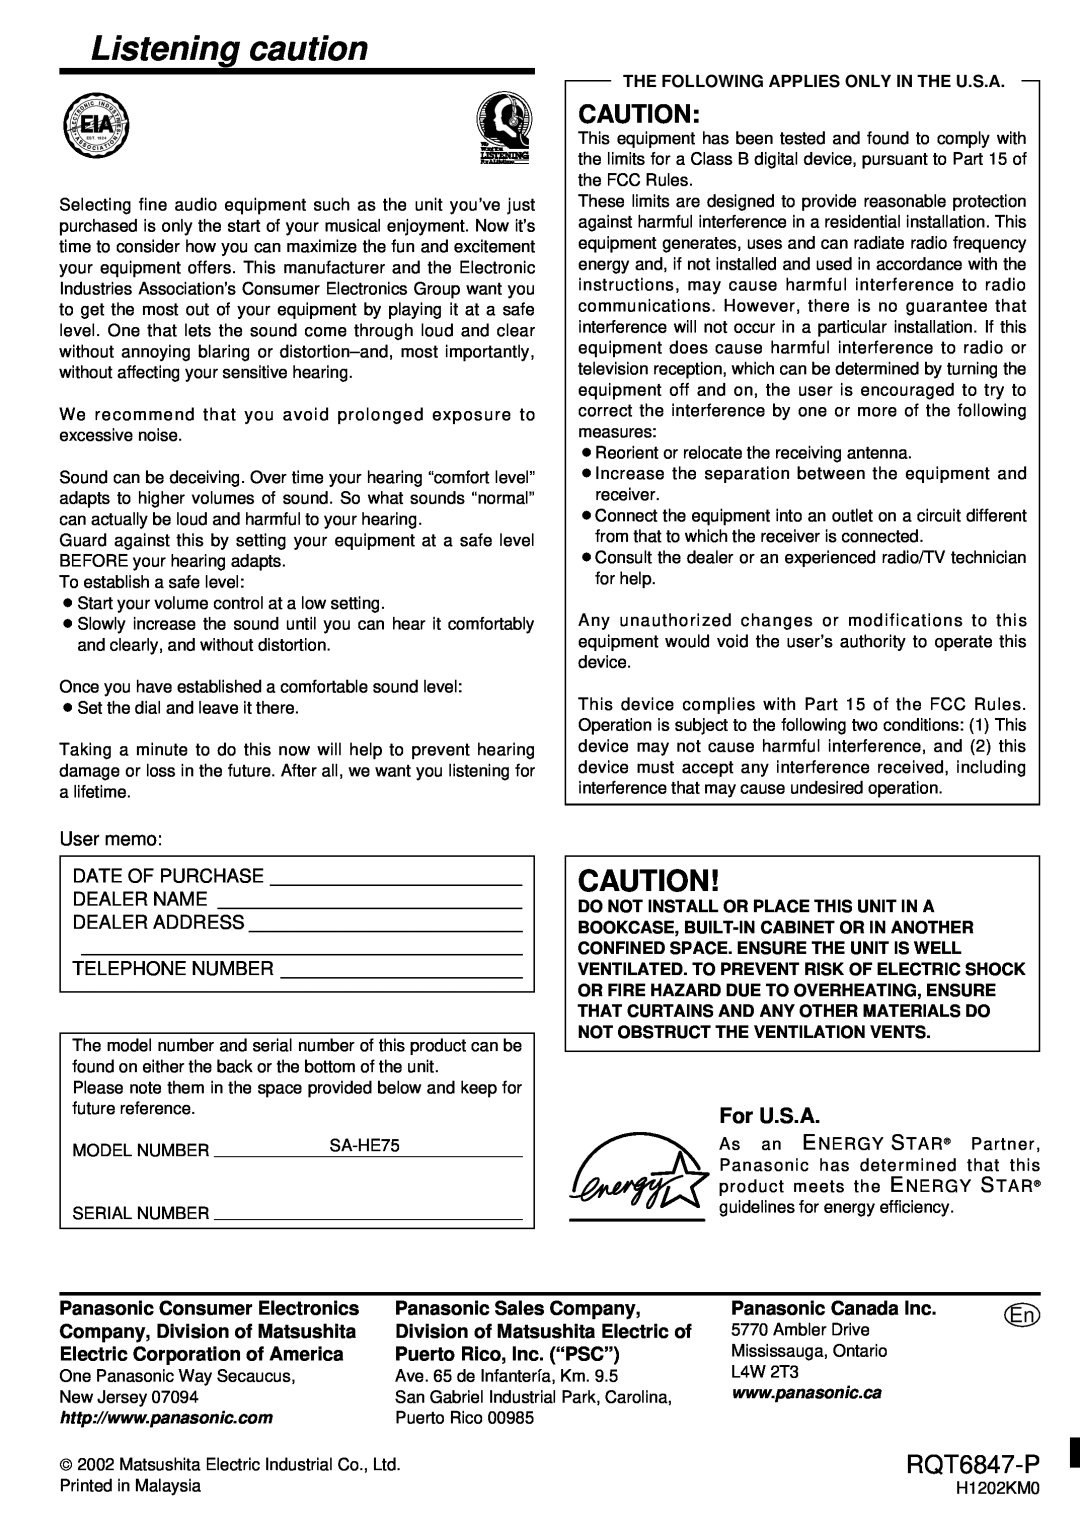 Panasonic SA-HE75 Listening caution, RQT6847-P, For U.S.A, User memo, Date Of Purchase, Dealer Name, Dealer Address 